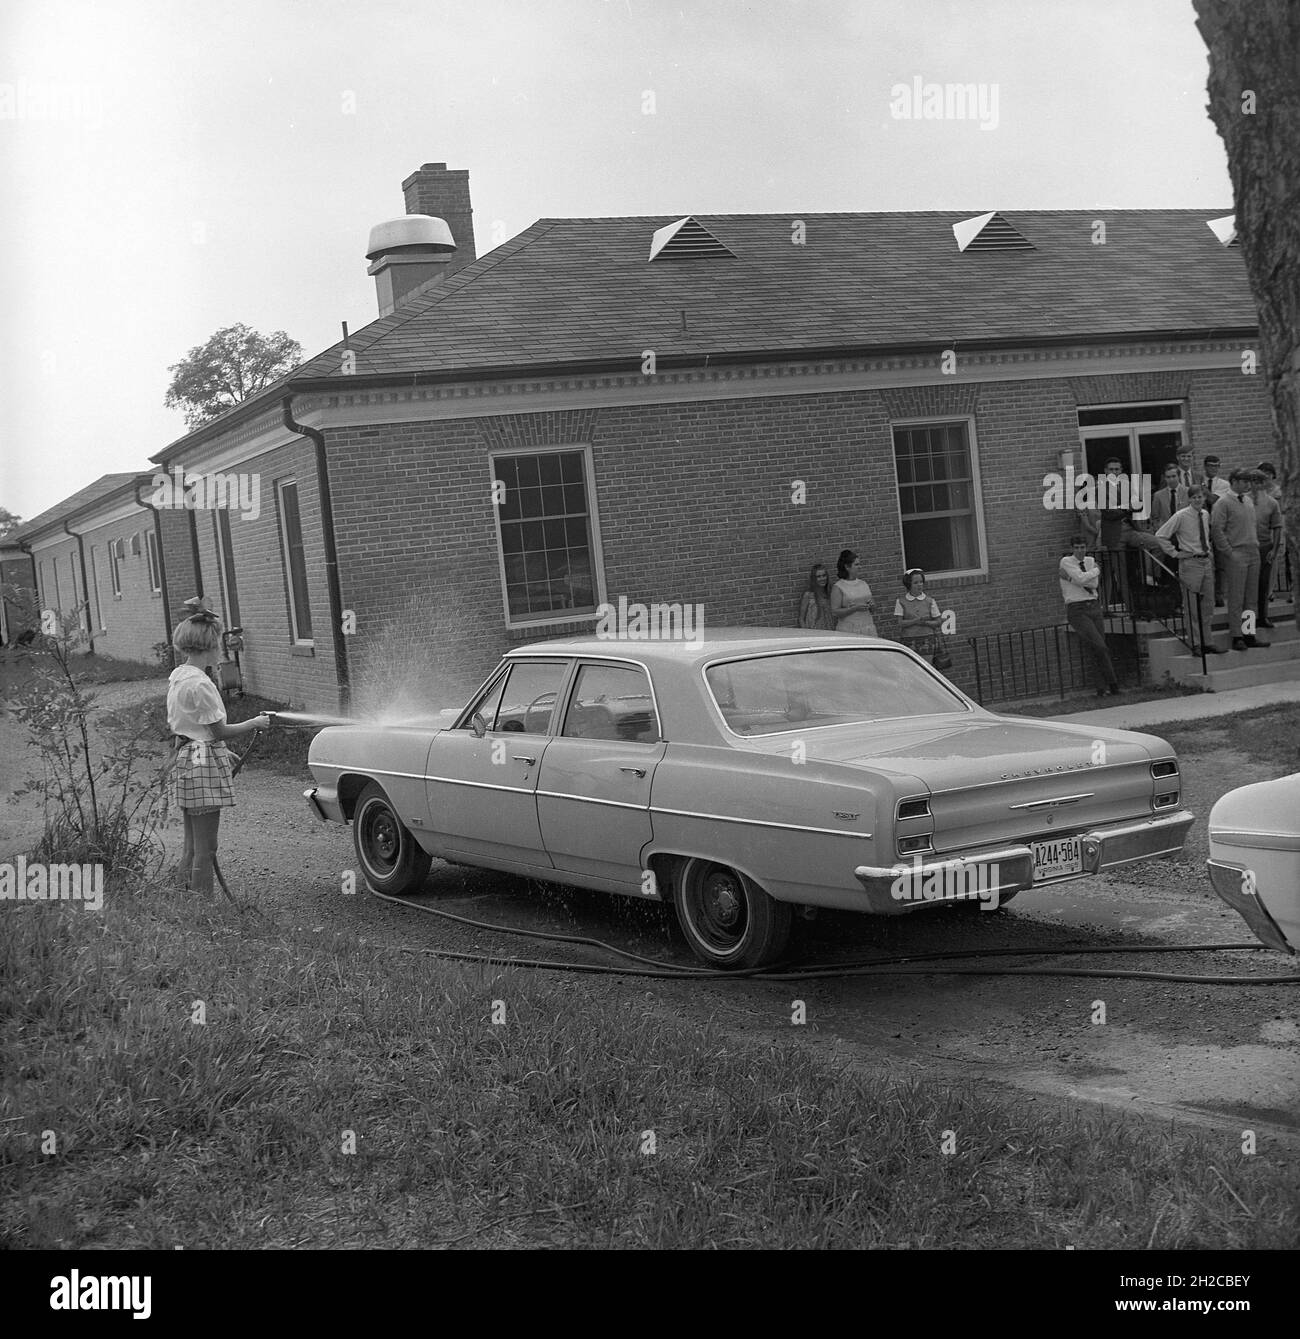 1960s, historical, outside a single-storey building at a college, with students and teachers looking on, a teenage girl in a skirt and ankle socks using a jet spray to wash an American Chevrolet automobile, Middletown, Virginia, USA. Stock Photo